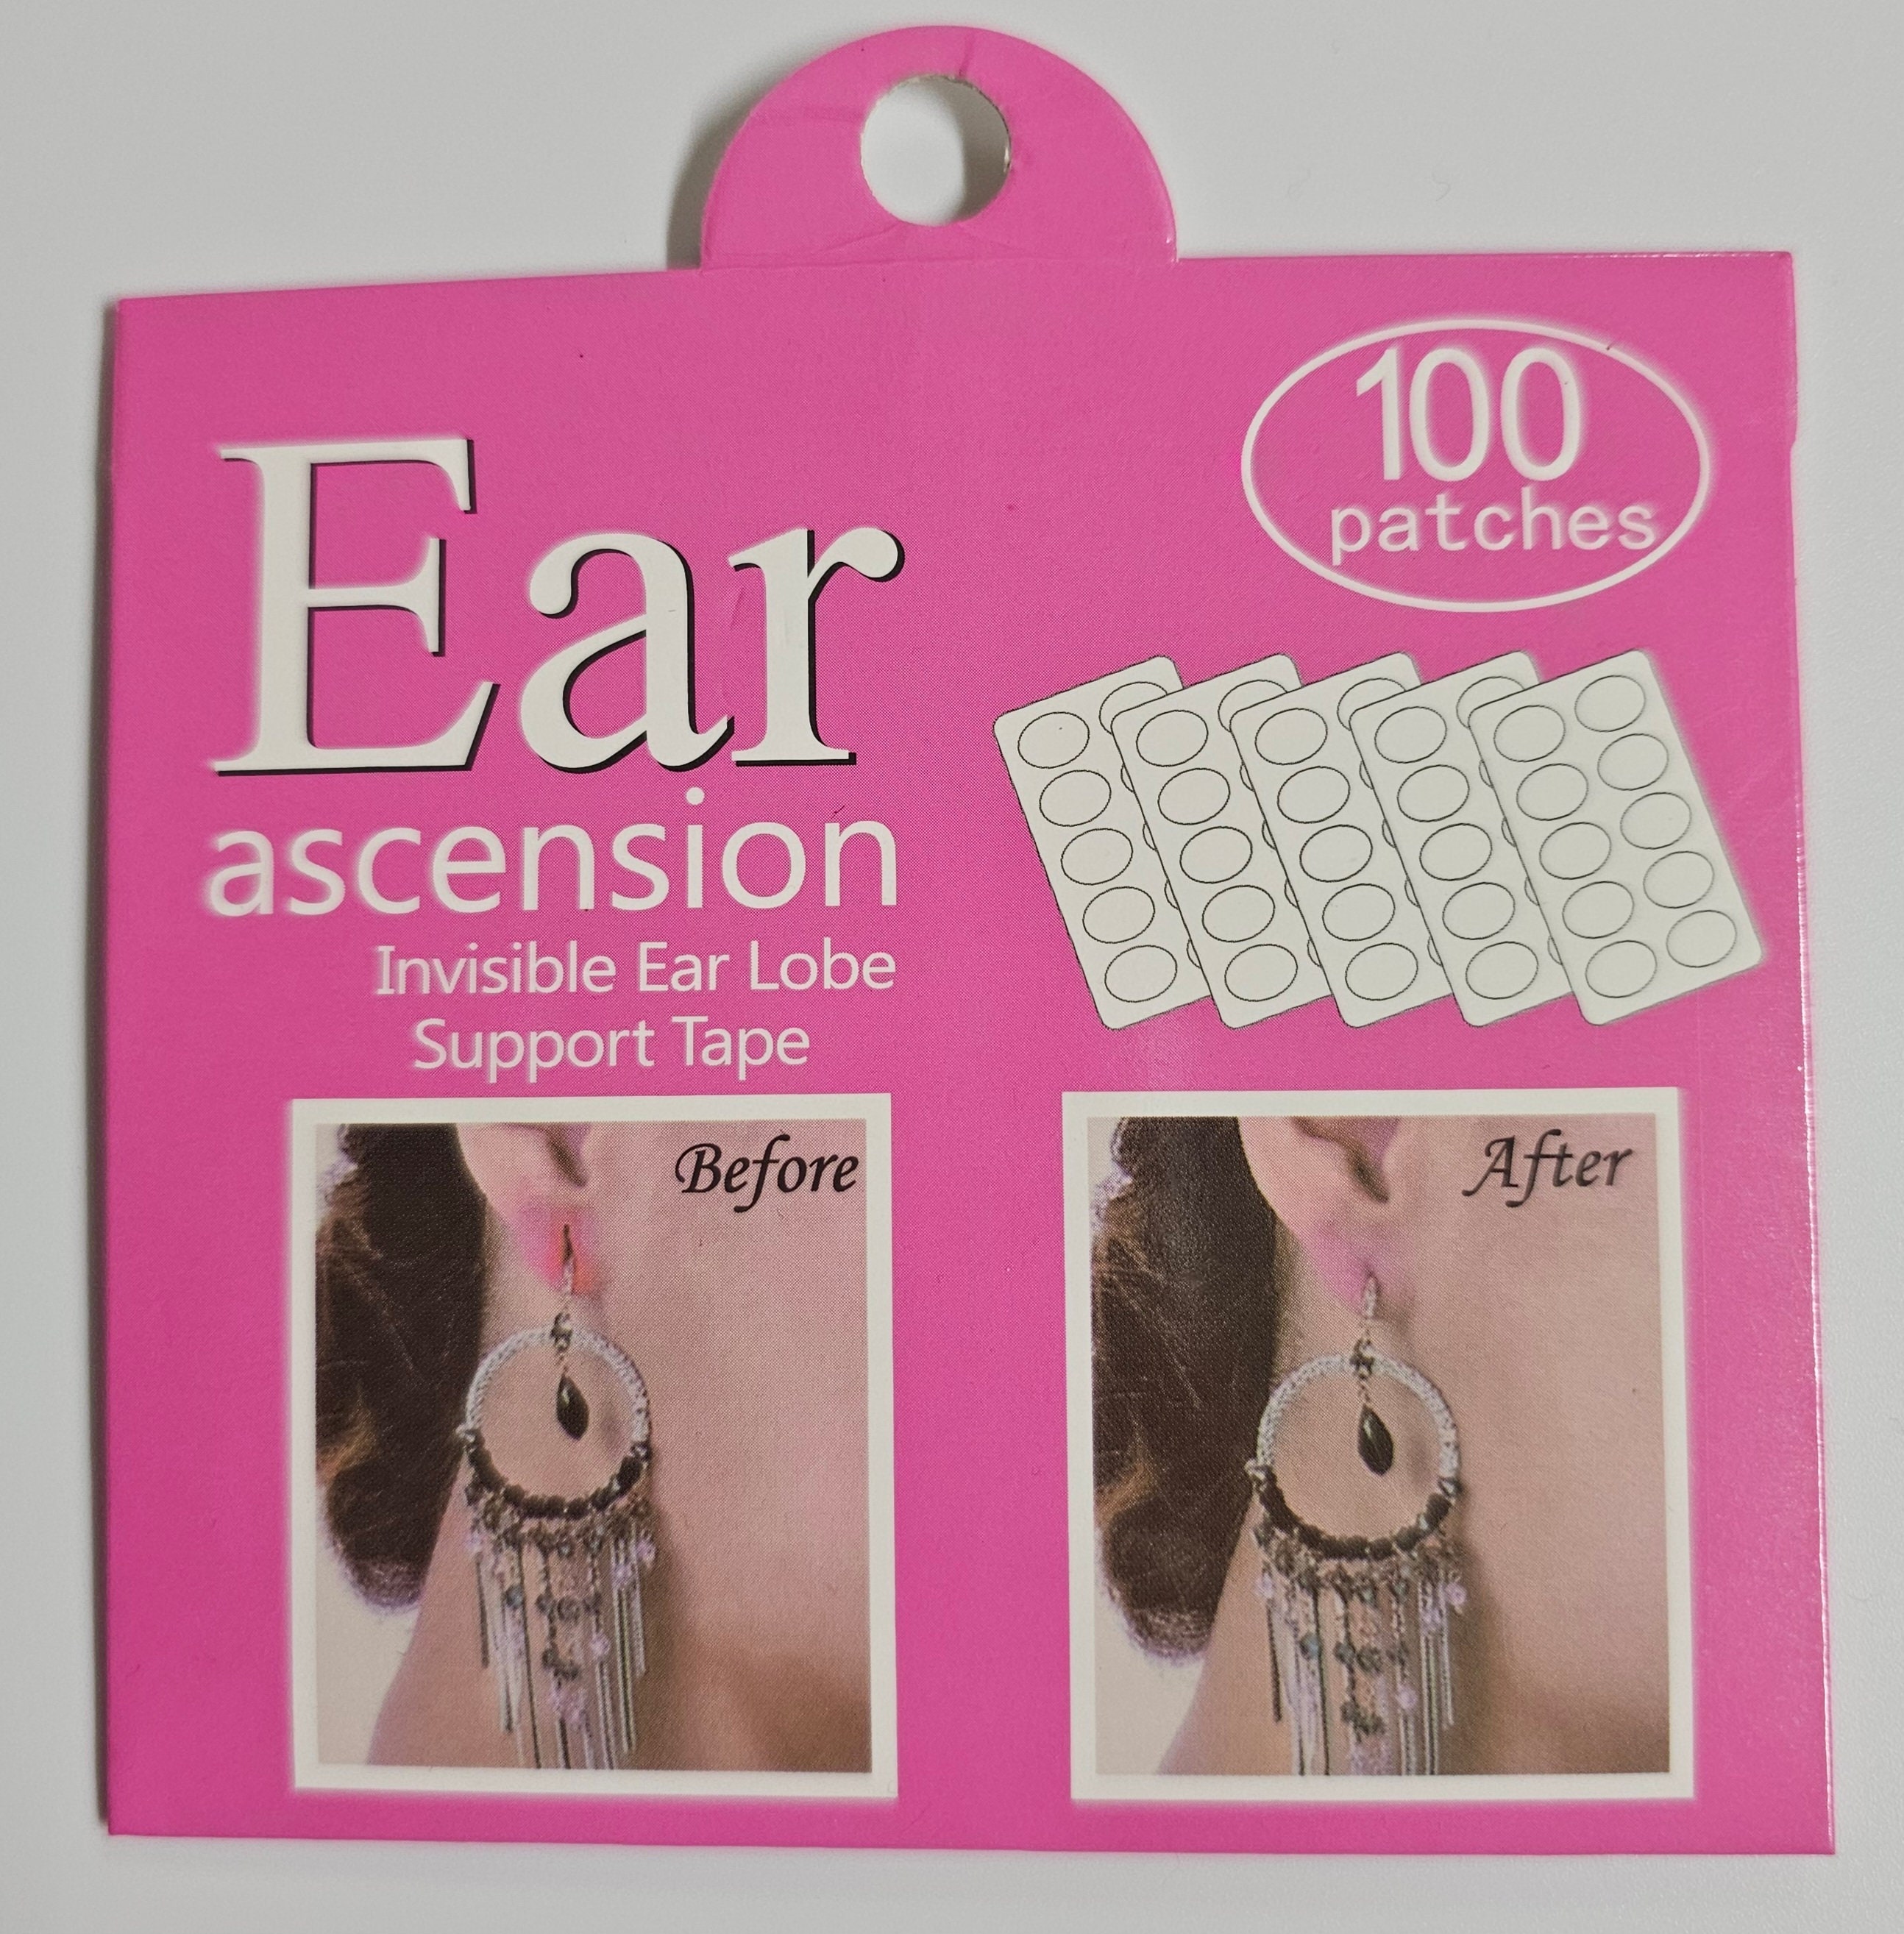 300pcs Invisible Earrings Stabilizers Earlobes Protective Waterproof Patches  Earrings Support Ear Patches For Earrings